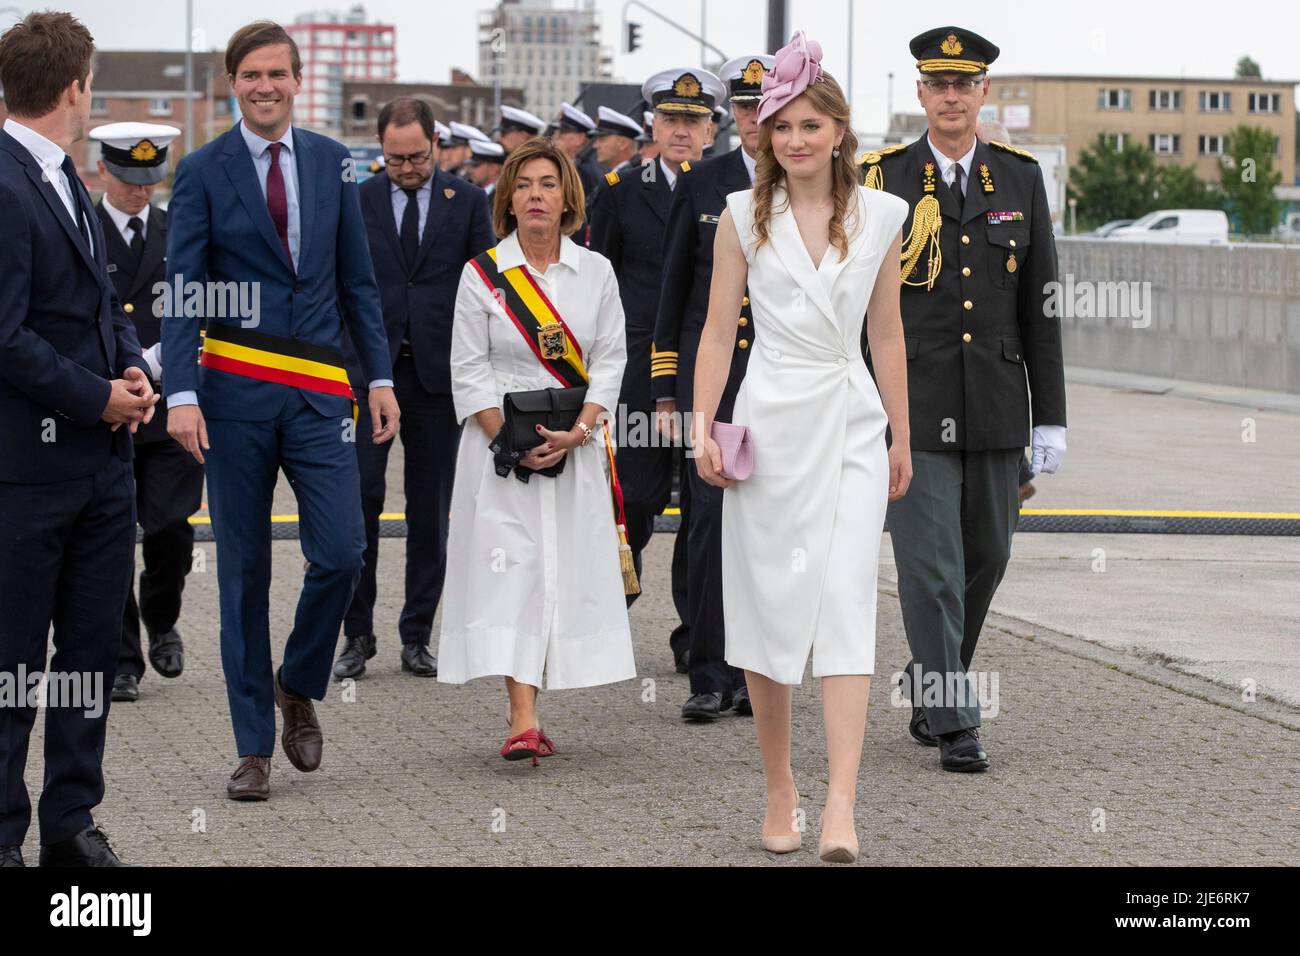 State Secretary for scientific policy Thomas Dermine, Gent Mayor Mathias De Clercq, East-Flanders province governor Carina Van Cauter and Crown Princess Elisabeth pictured during the baptism ceremony of the new research vessel RV Belgica with the Belgian Crown Princess, in Ghent. The RV Belgica will play a key role in Belgian and European marine research in the coming decades. Thanks to the new ship, marine scientists will be able to continue and expand their multi-day or multi-week expeditions in Belgian waters and beyond. The Belgian State, represented by the Federal Science Policy Office (B Stock Photo